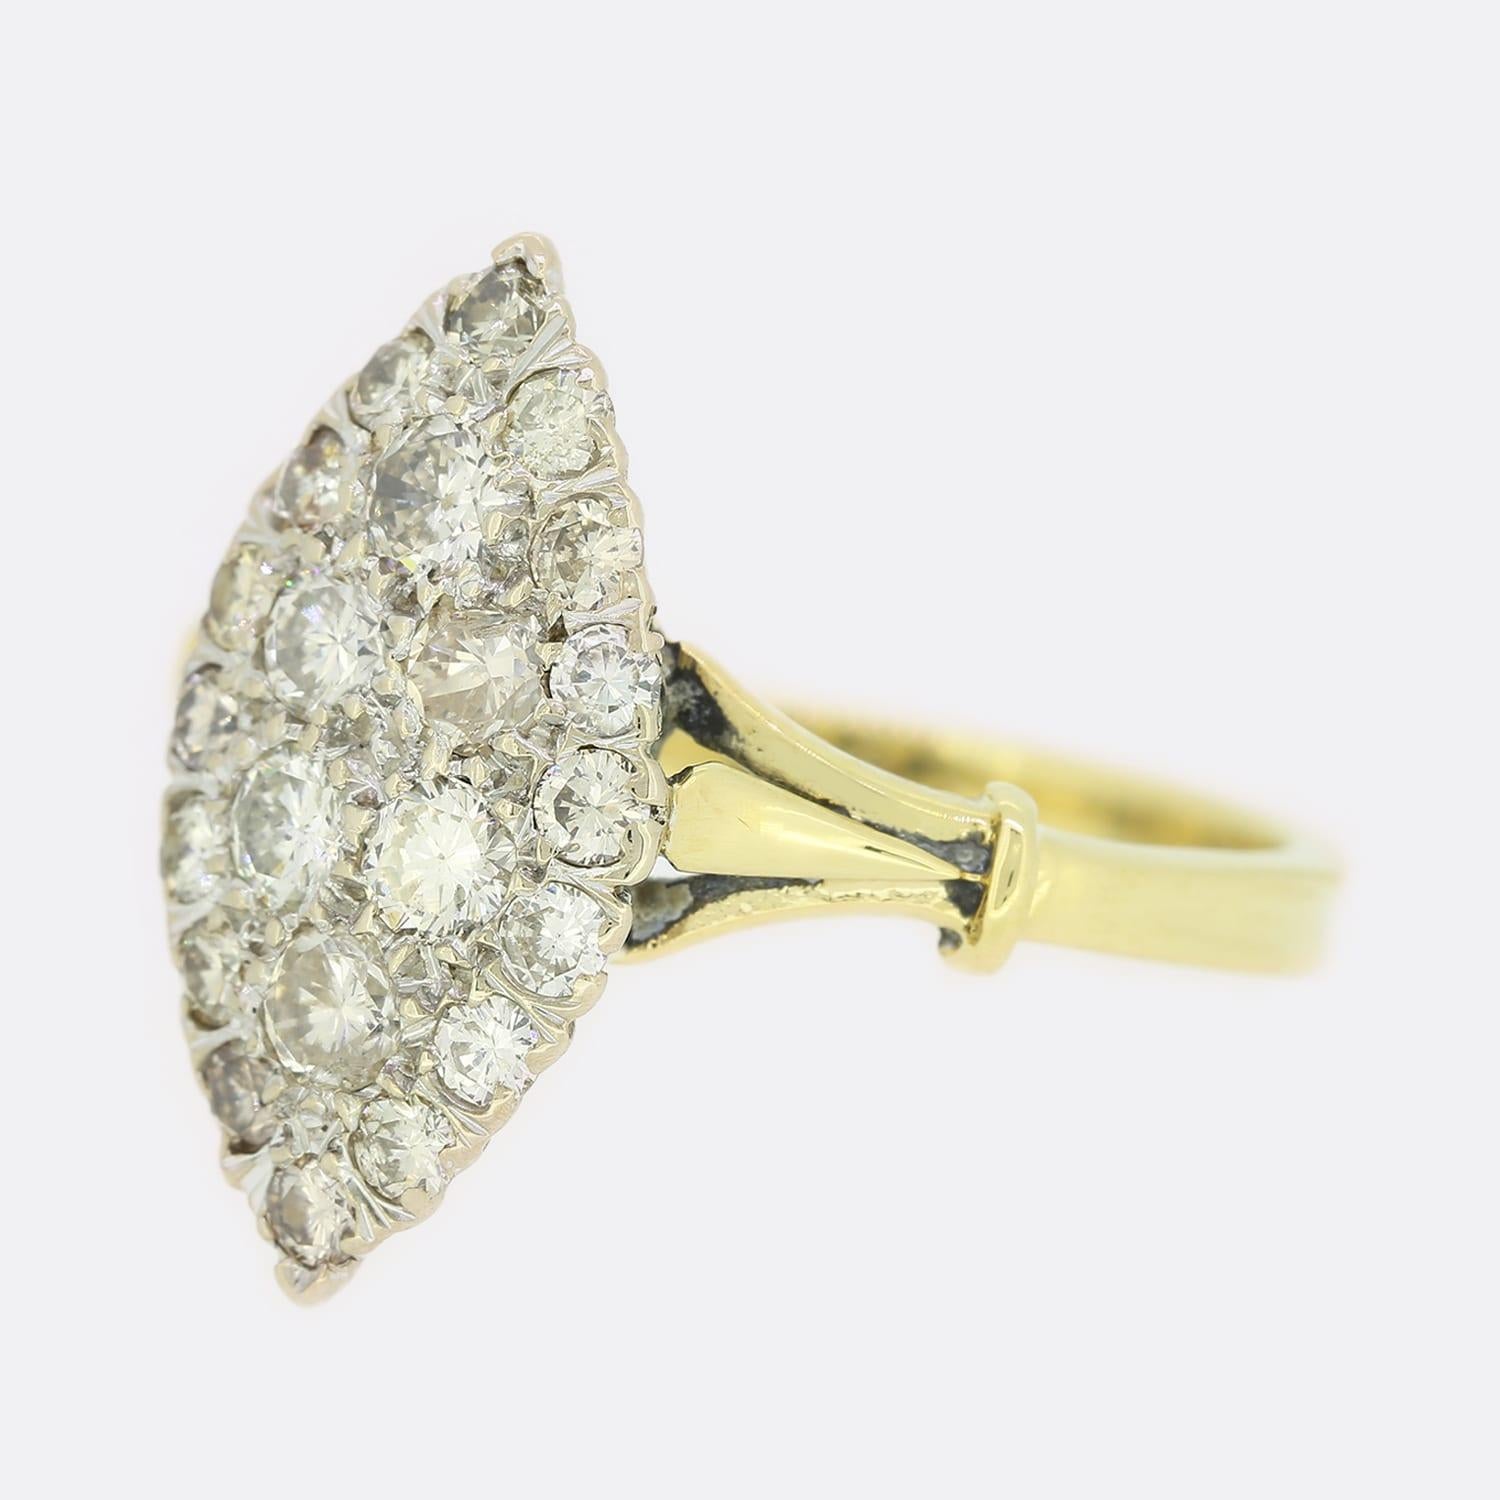 This is a 1970s diamond marquise ring. The ring is set with 22 round brilliant cut diamonds and lovely tapered shoulders. The diamonds are wonderfully matched for colour and clarity.

Condition: Used (Very Good)
Weight: 3.1 grams
Ring Size: I 1/2